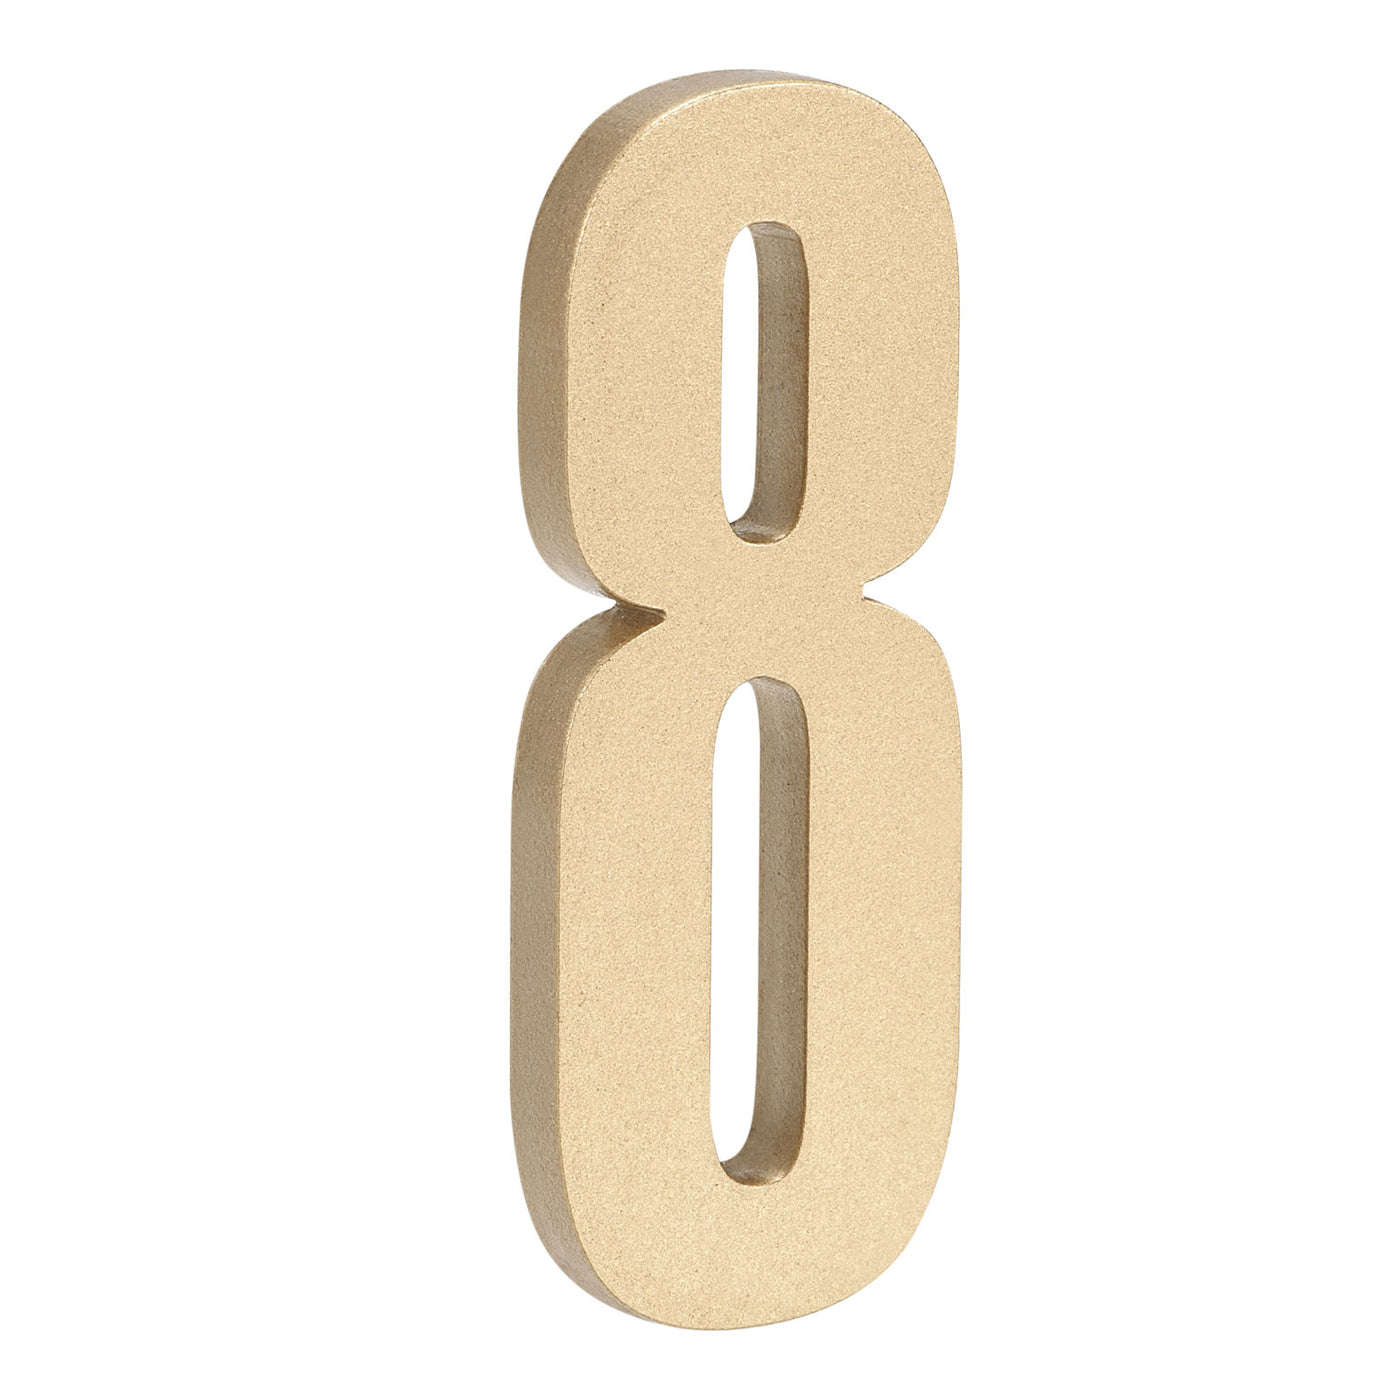 Uxcell Uxcell 3.94 Inch 3D Self-Adhesive House Number for Hotel Mailbox Address, Gold No.8